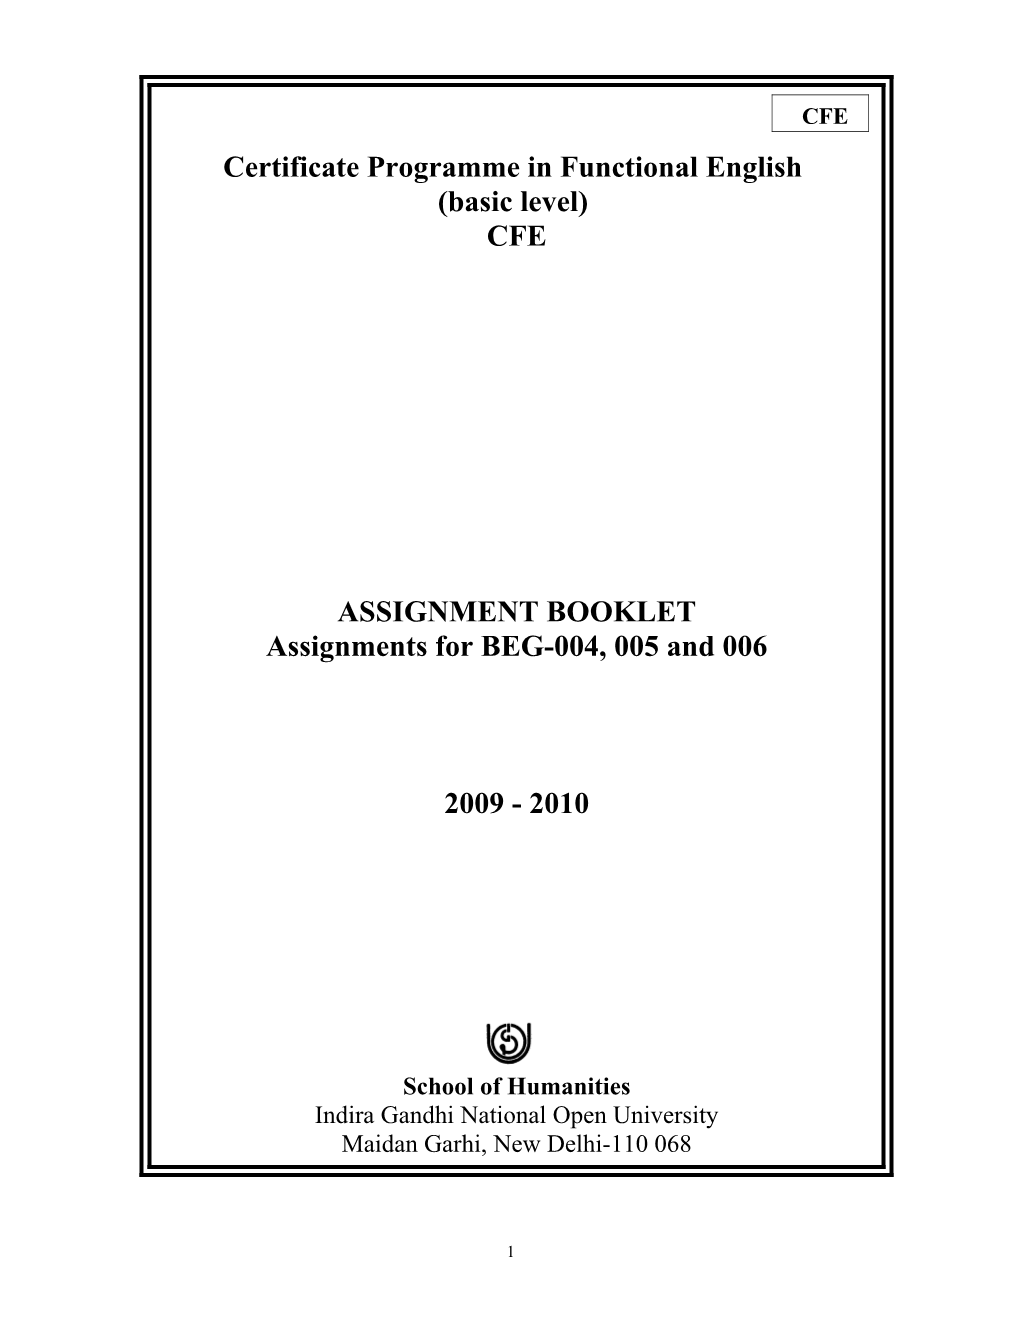 Certificate Programme in Functional English